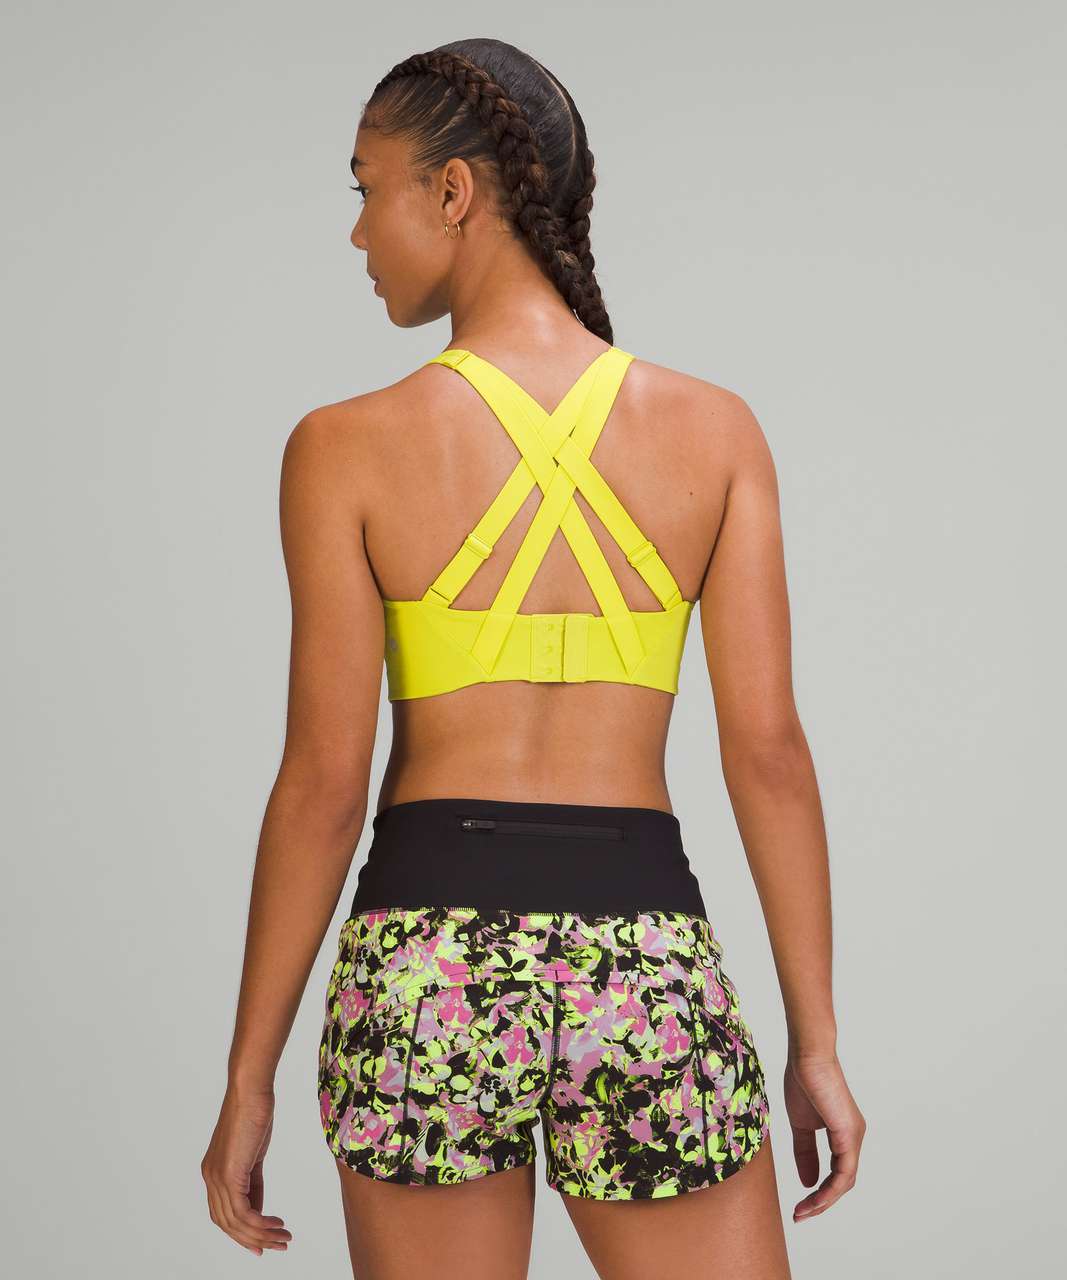 Lululemon NEW Energy Bra *High Support, B-DDD Cups Size undefined - $49 New  With Tags - From Shop